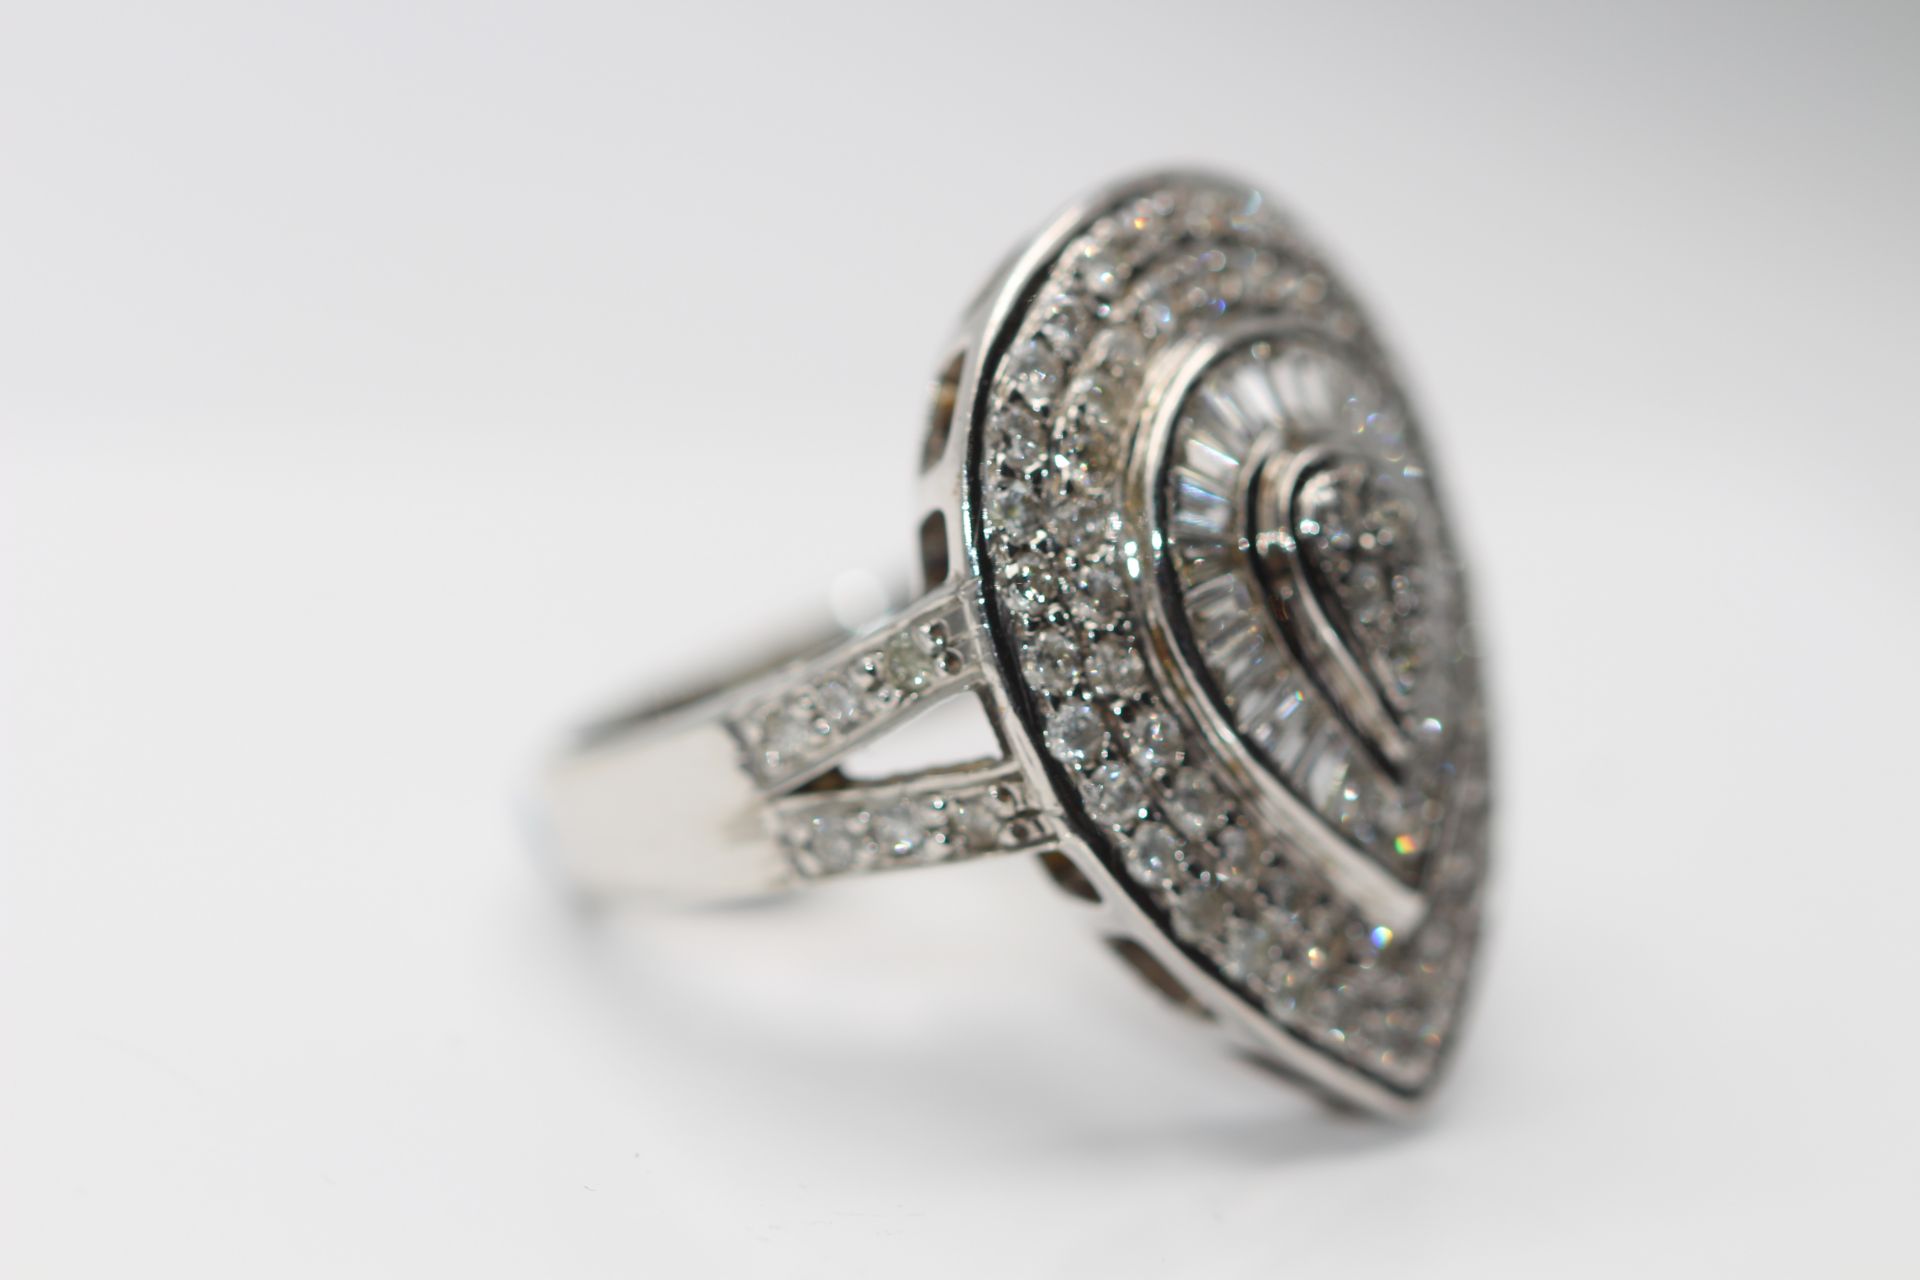 14ct White Gold Ladies Diamond Ring, Set With 3.63 Carats of Diamond Solitaires and Baguette's - Image 2 of 4